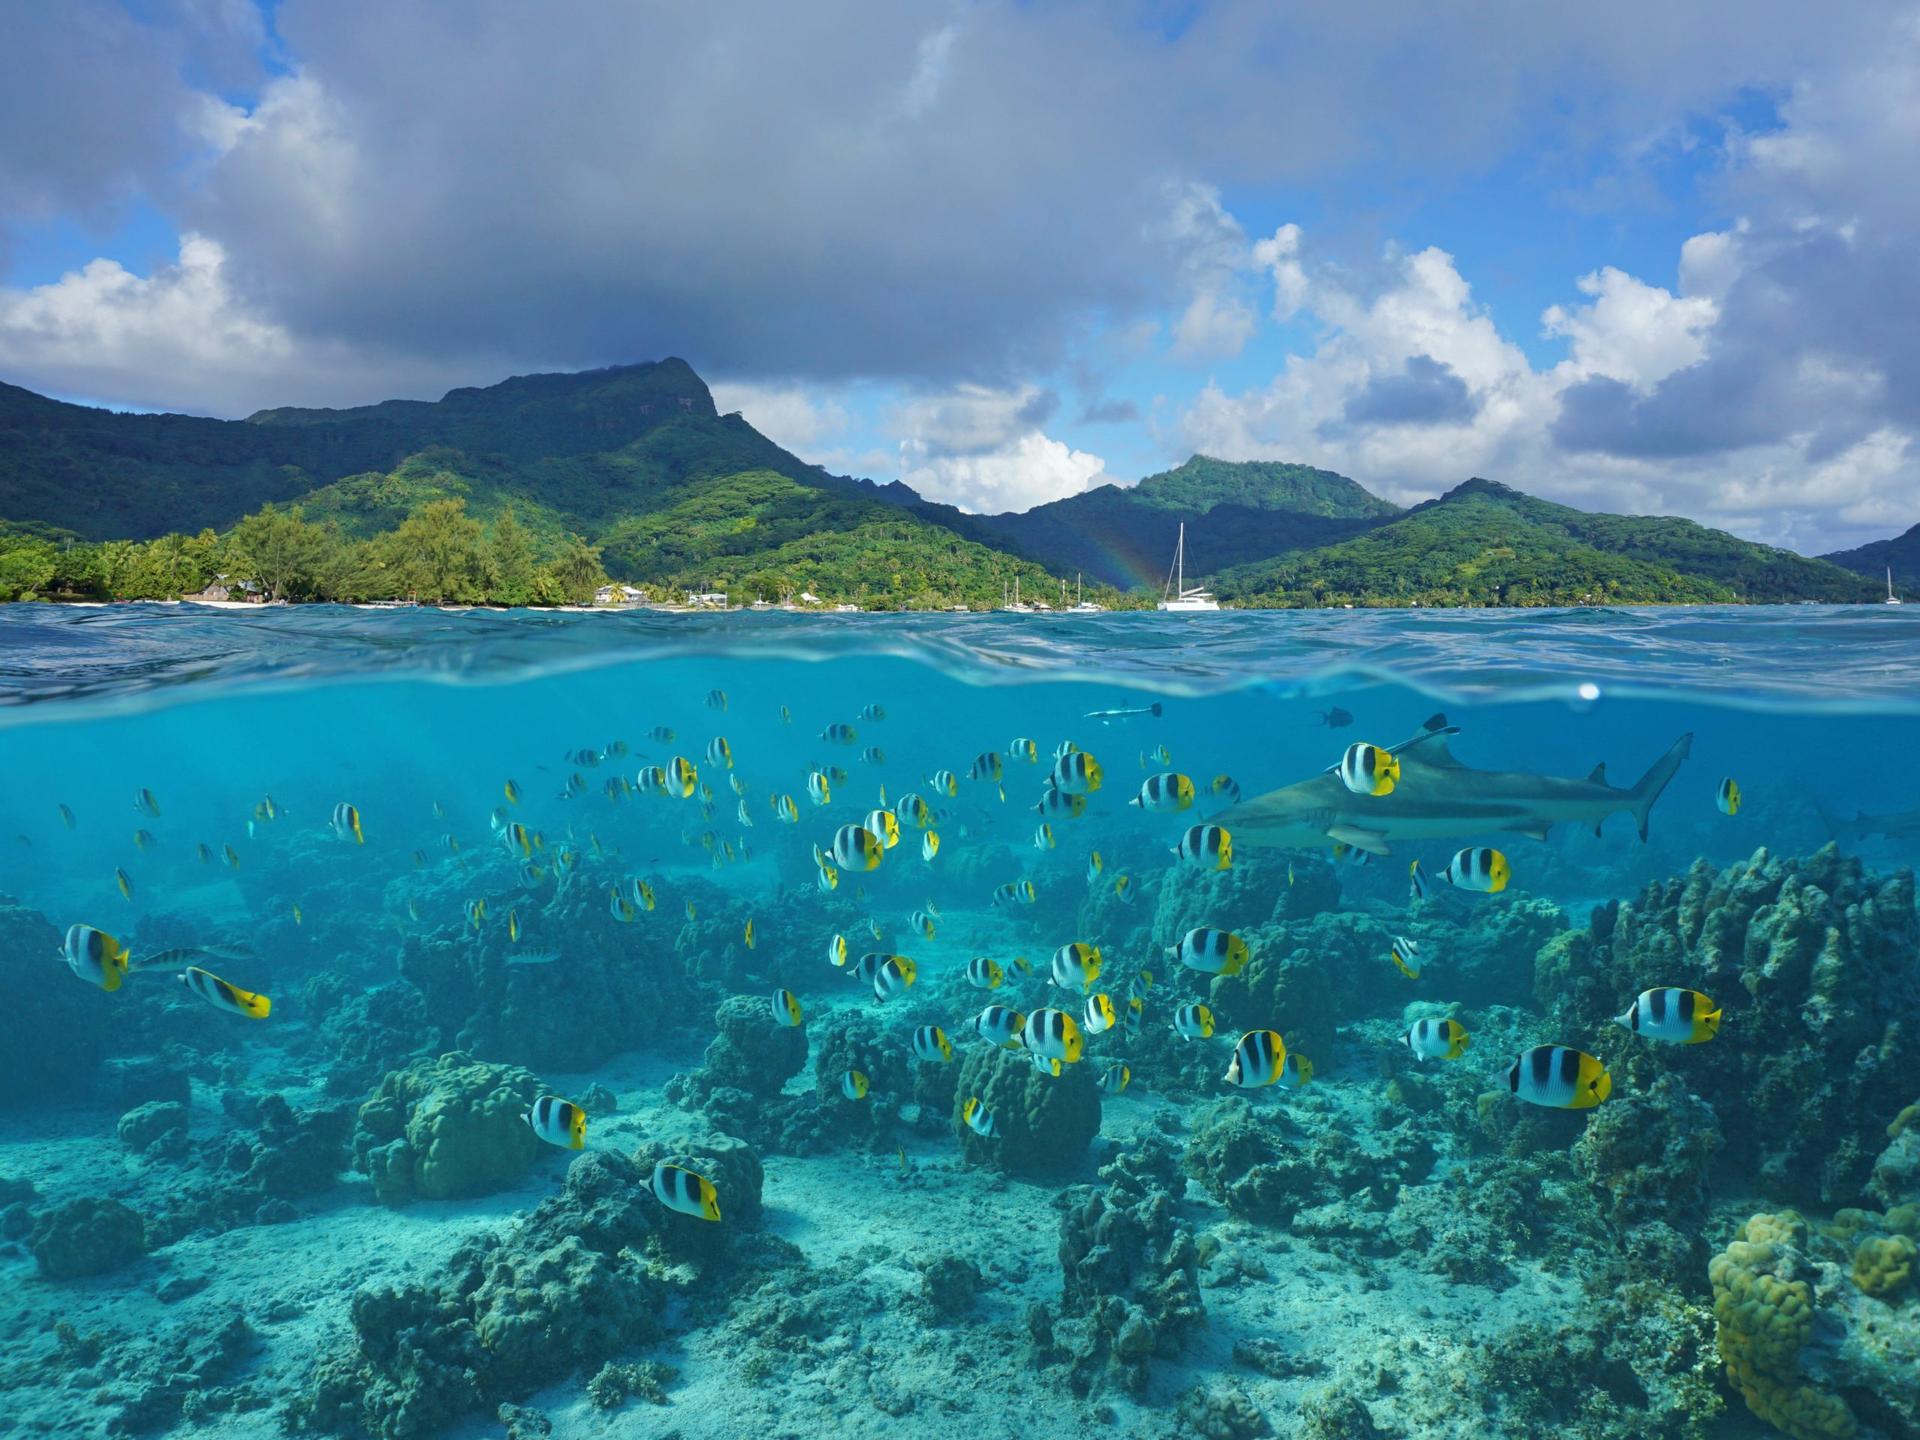 Above and below sea surface, the coast of Huahine island and coral reef fish school with a shark underwater, Pacific ocean, French Polynesia